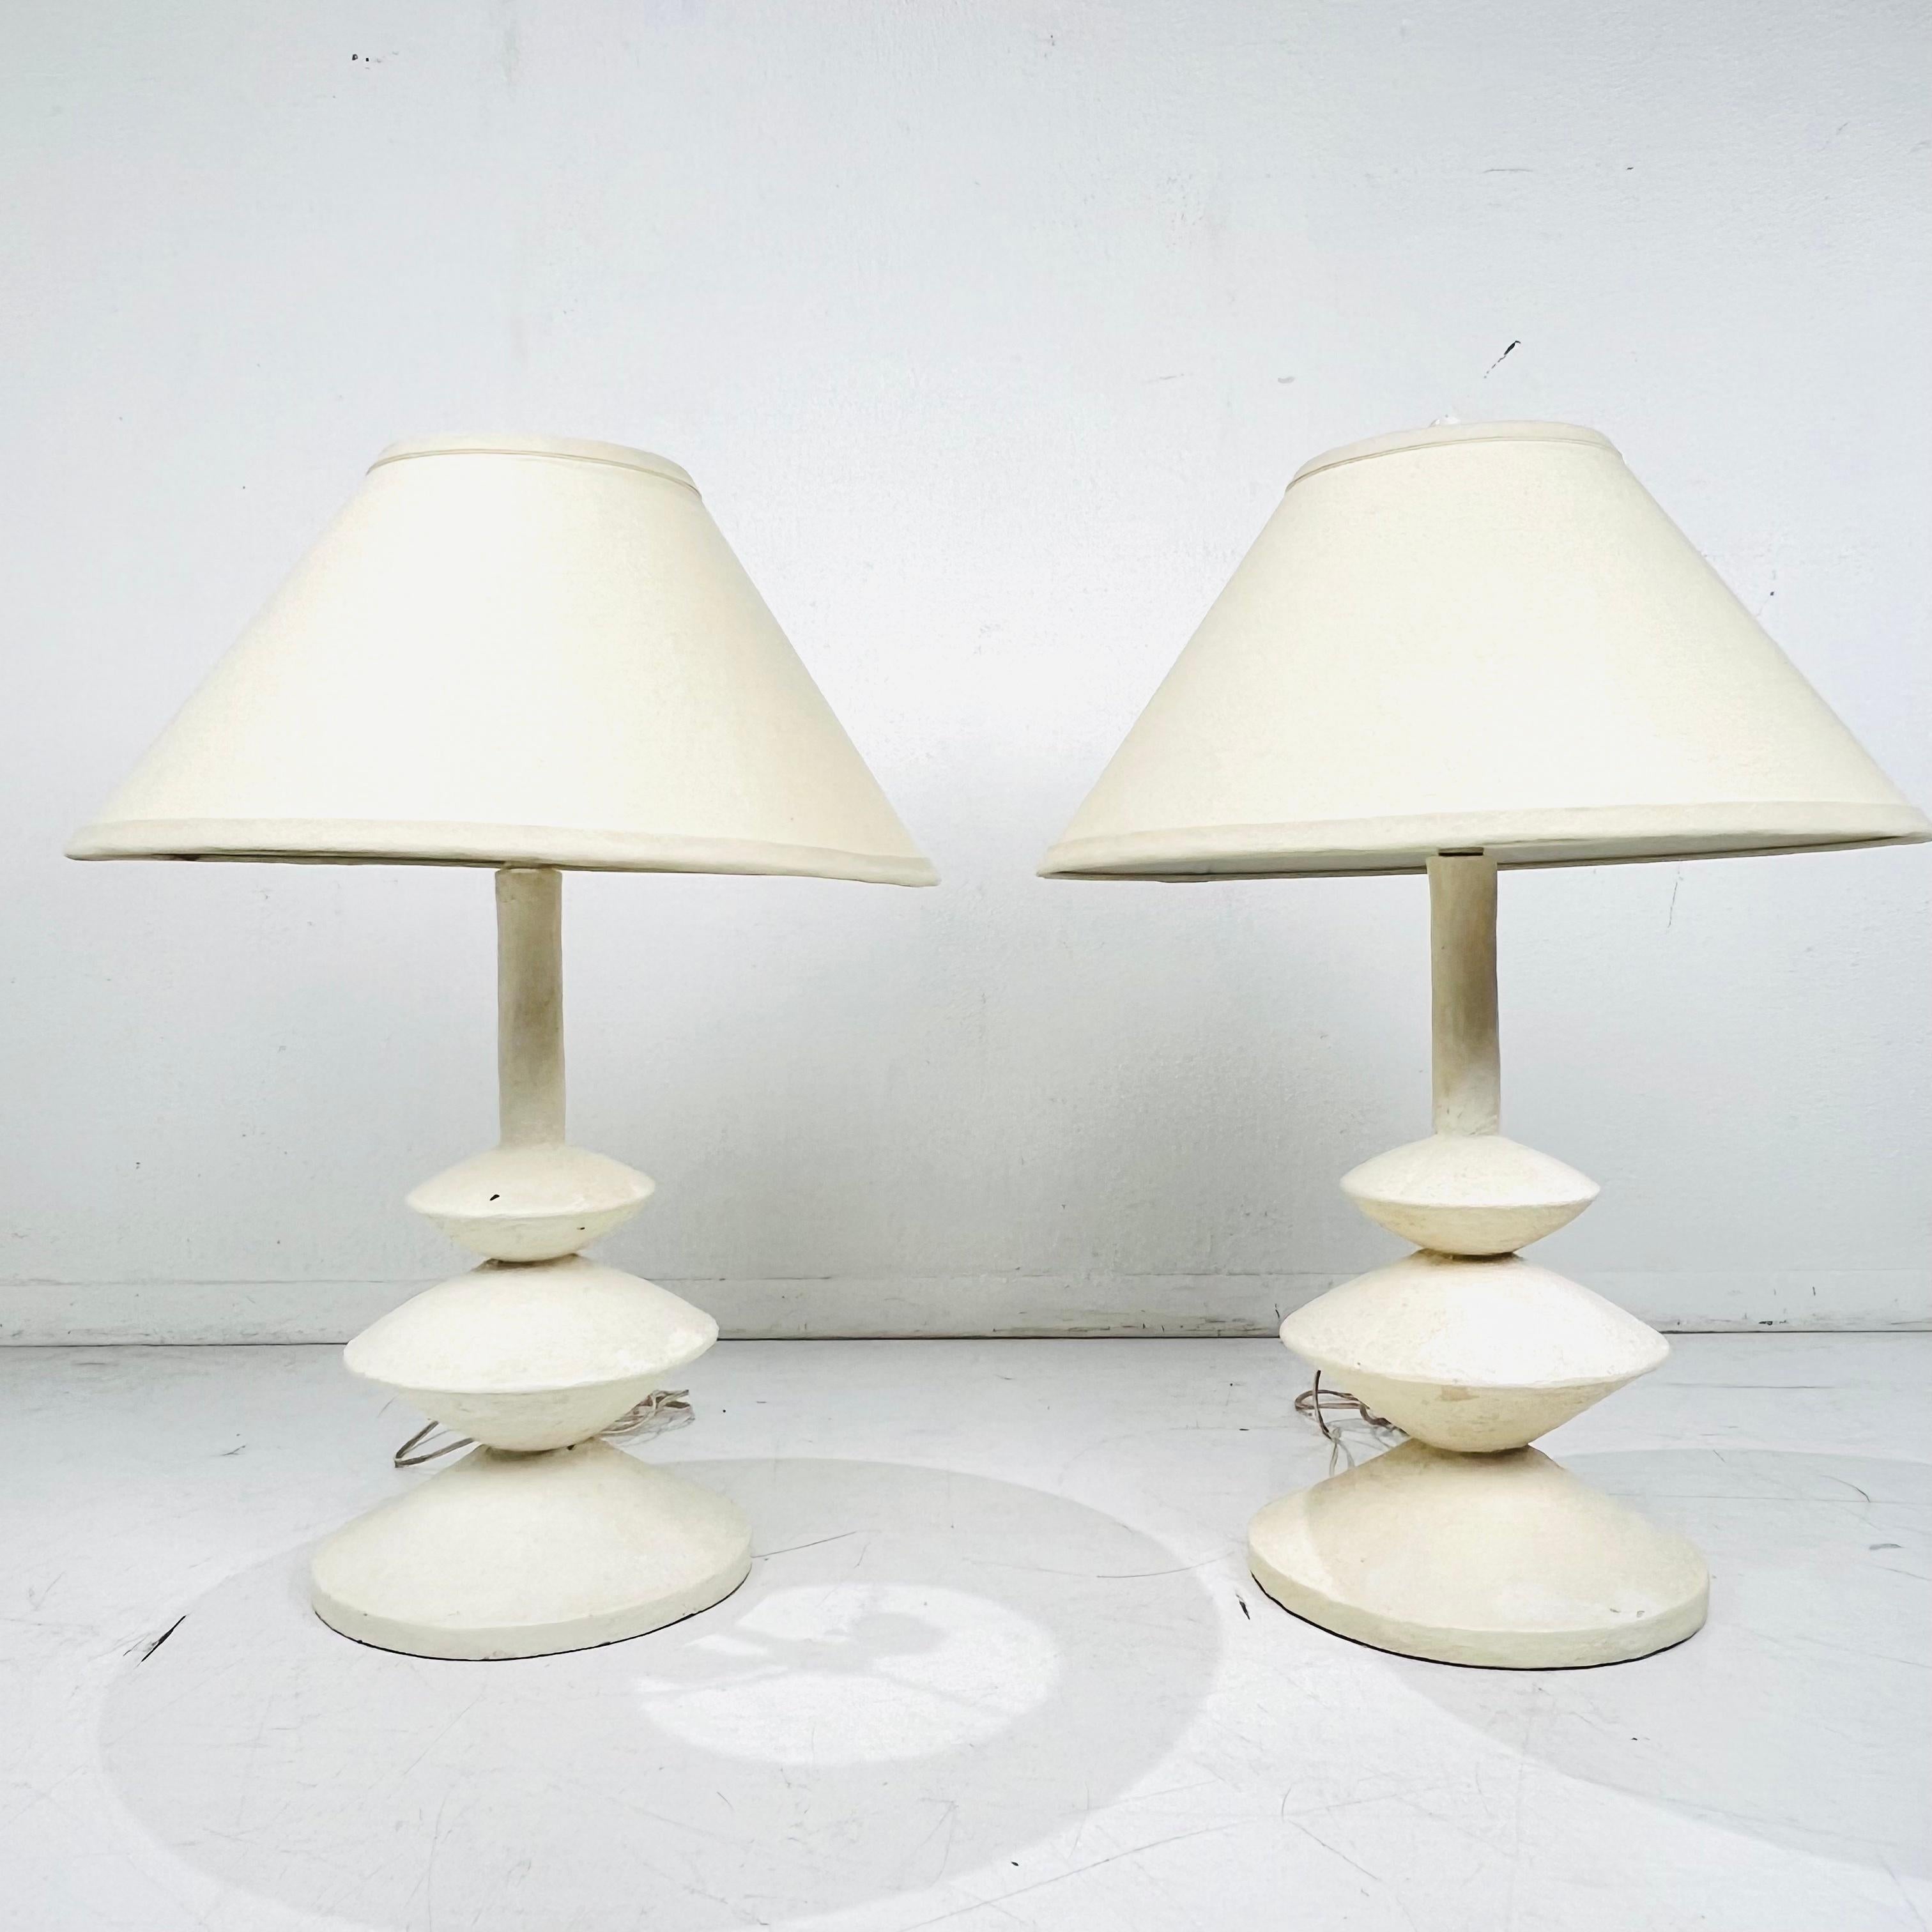 Elegant Pair of French style table lamps in the style of Alberto and Diego Giacometti. These lamps have a timeless columnar, cylindrical organic form that has an enchanting sensibility. Priced and sold as a pair. Shades are not included. Sturdy and